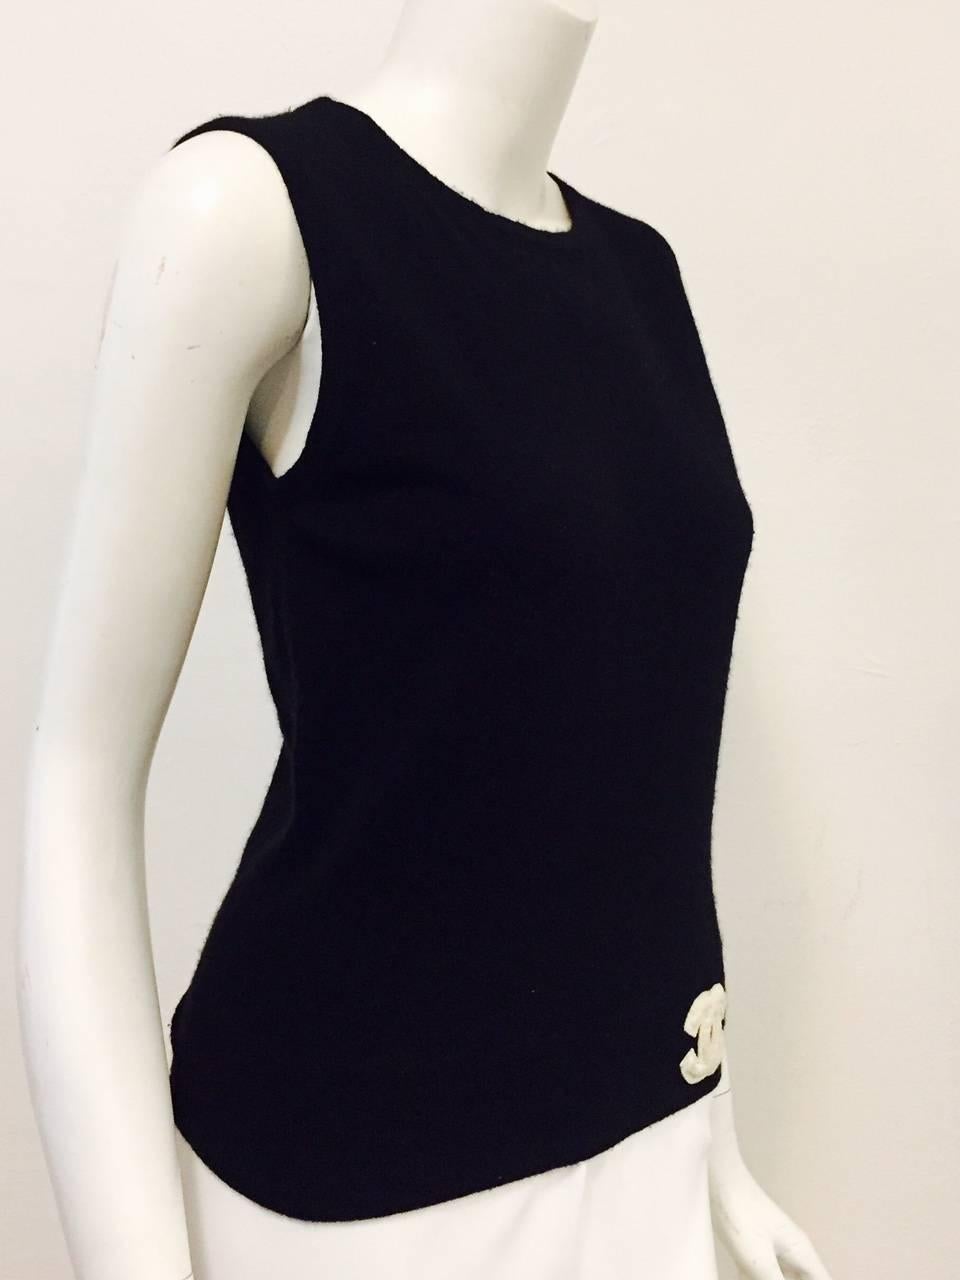 Chanel is much more than feminine skirt suits and quilted handbags!  Reminiscent of collegiate Varsity squads, this black sweater vest is a must for any connoisseur of Coco.  Features ultra-luxurious cashmere, round neckline nad deep banded hem. 